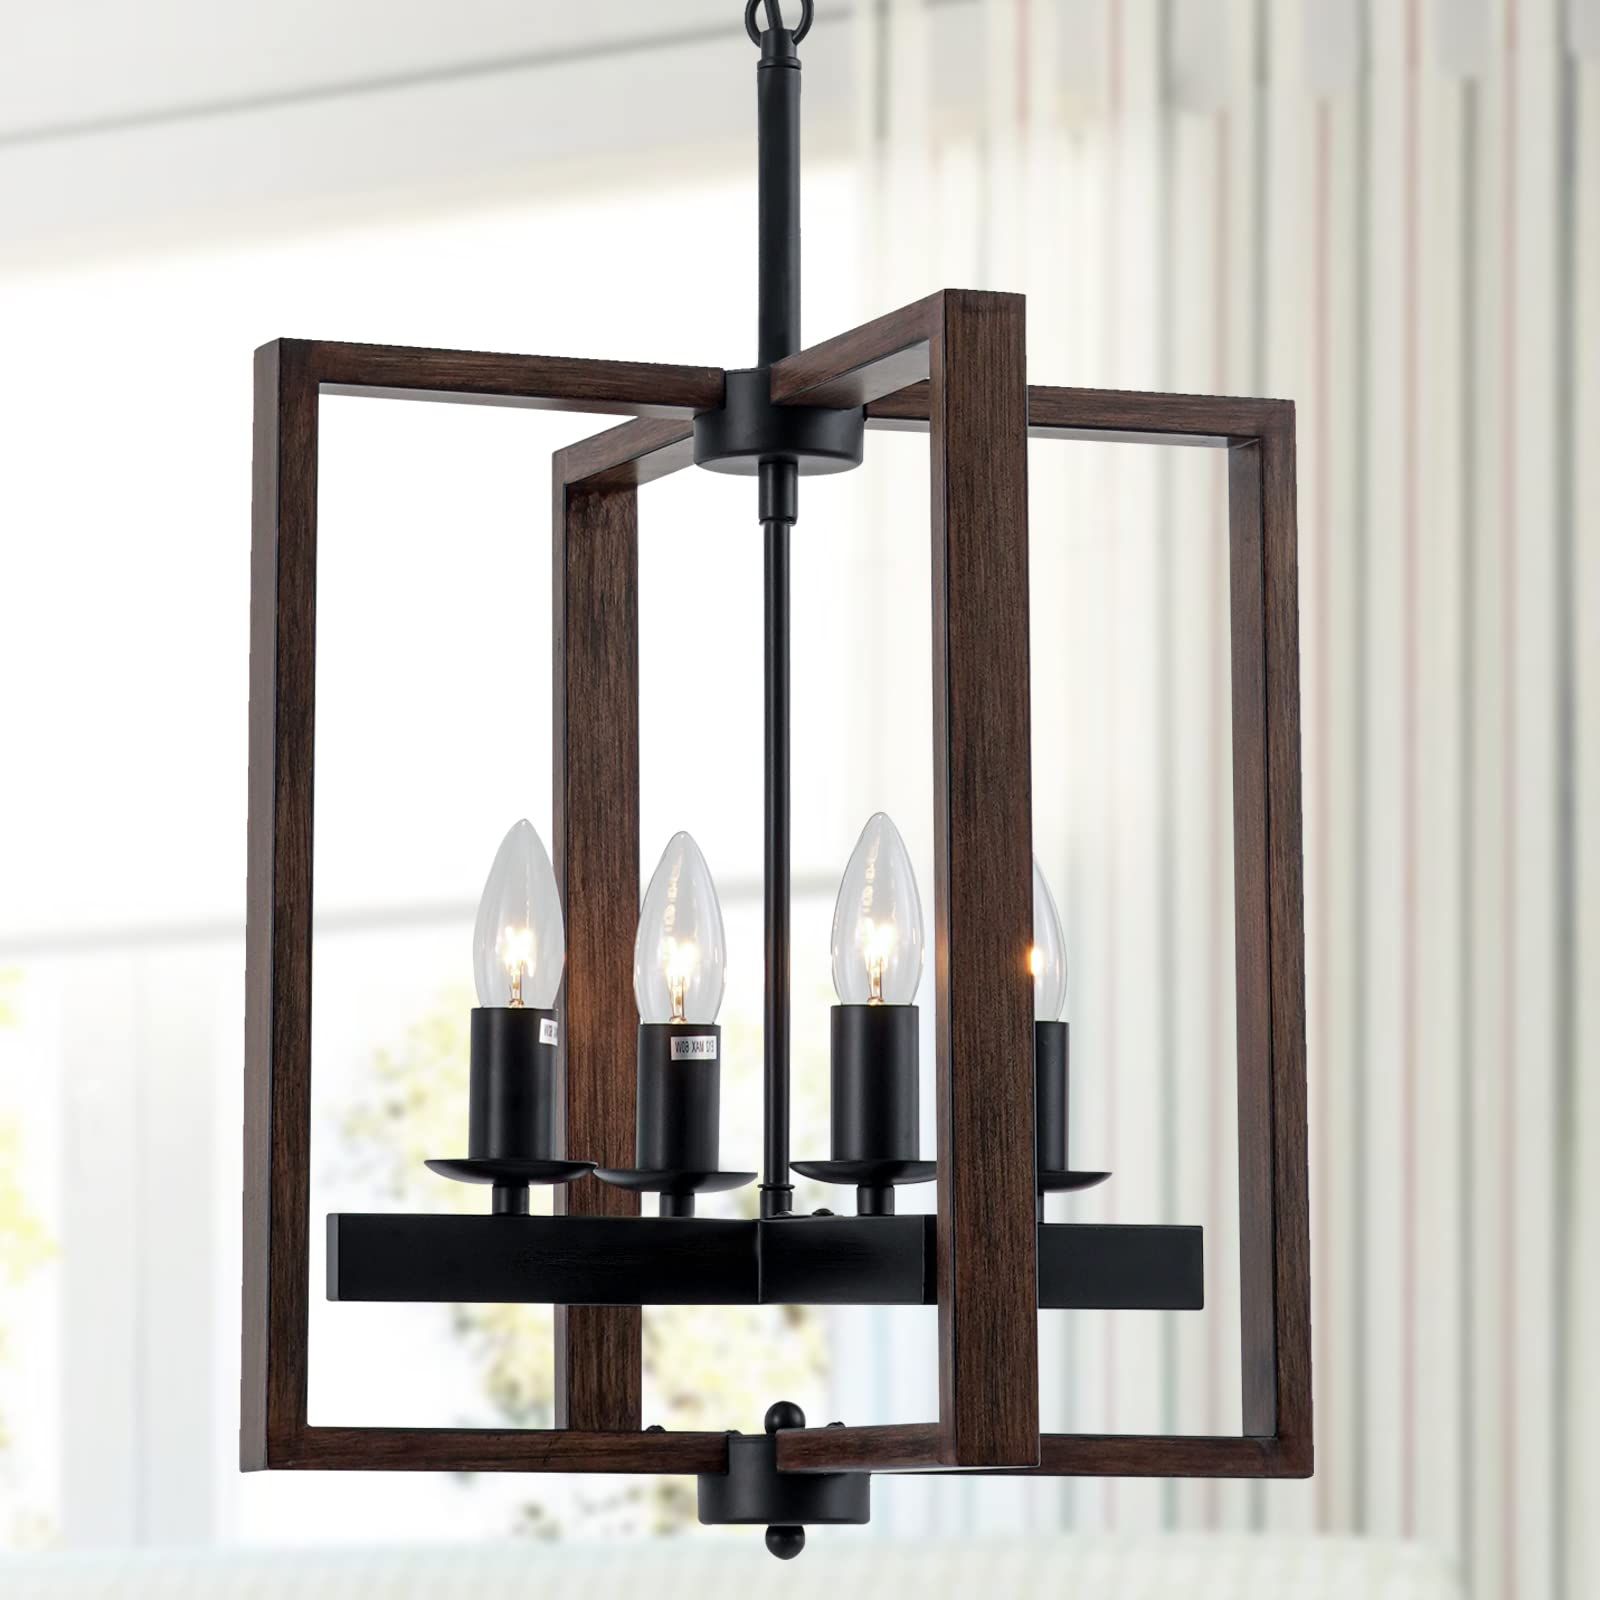 Graphite Lantern Chandeliers Inside Well Liked Amazon: Industrial Lantern Chandelier, 4 Light Vintage Rectangle Flush  Mount Ceiling Light Fixture,hand Painted Graphite Finish Farmhouse Pendant  Lighting Fixtures For Living Room Kitchen Island Foyer Hallway : Everything  Else (View 2 of 10)